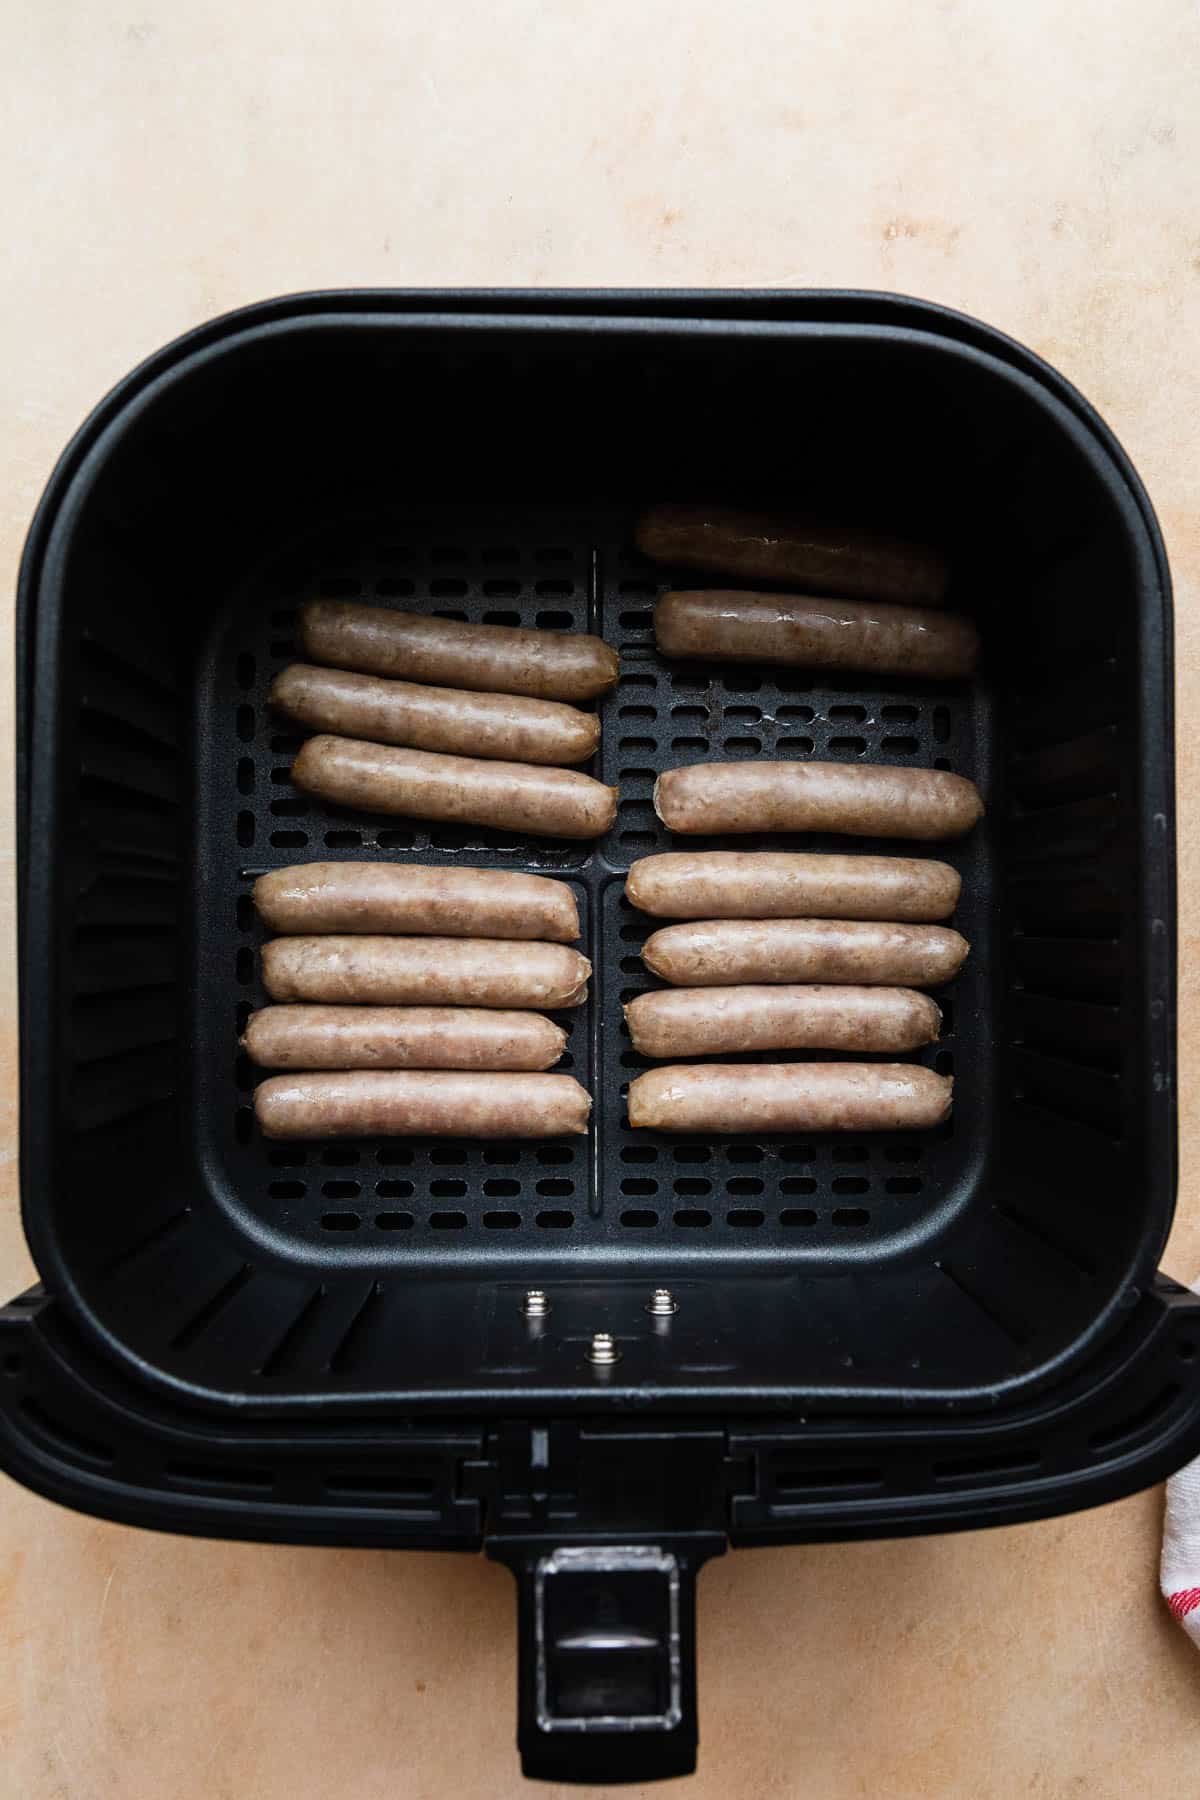 sausage links in air fryer basket cooked at the halfway point